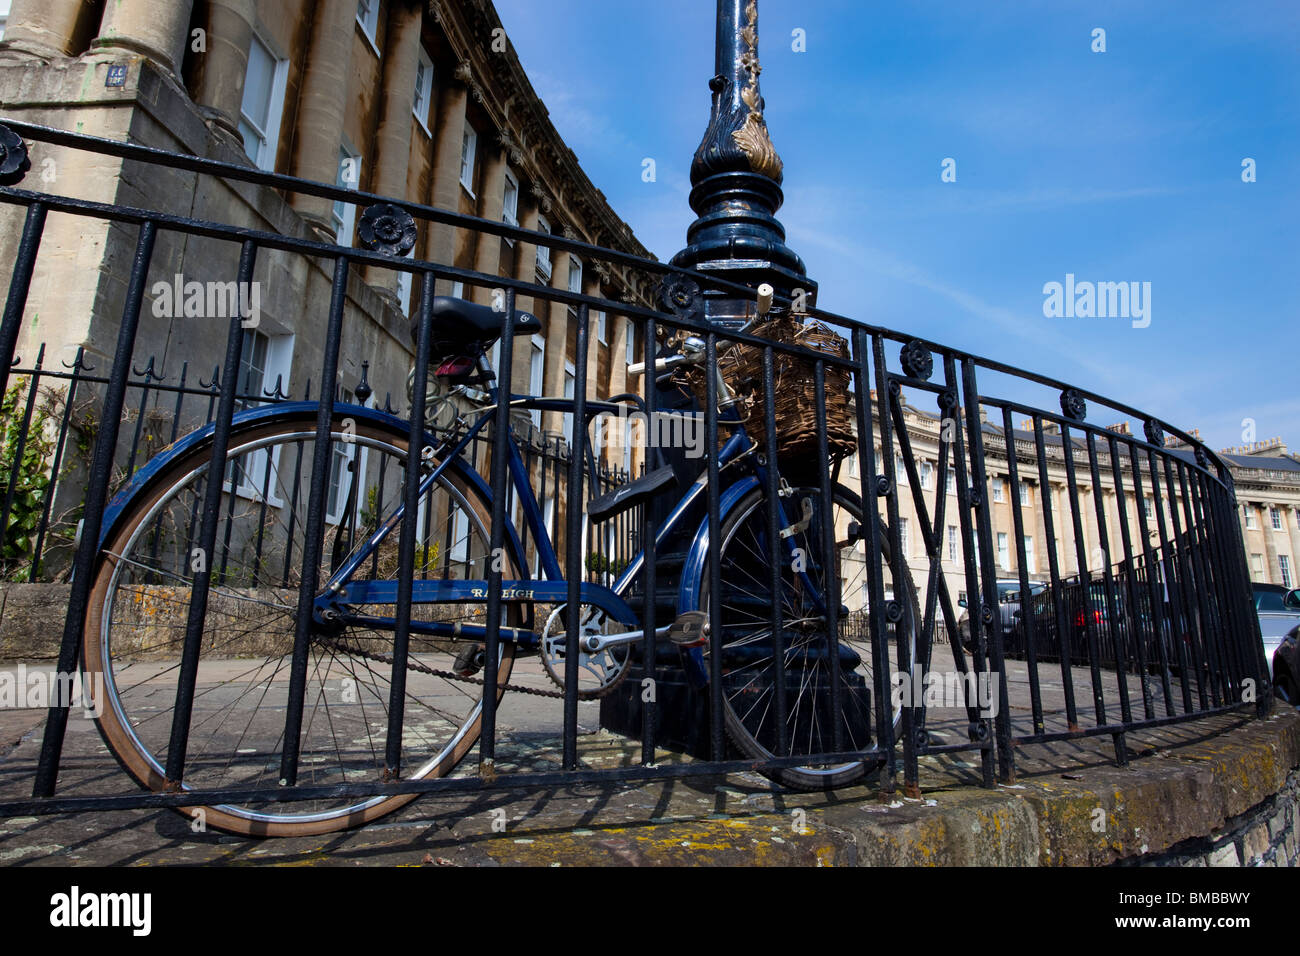 A bicycle chained to rails in The Royal Crescent, Bath, England, UK Stock Photo